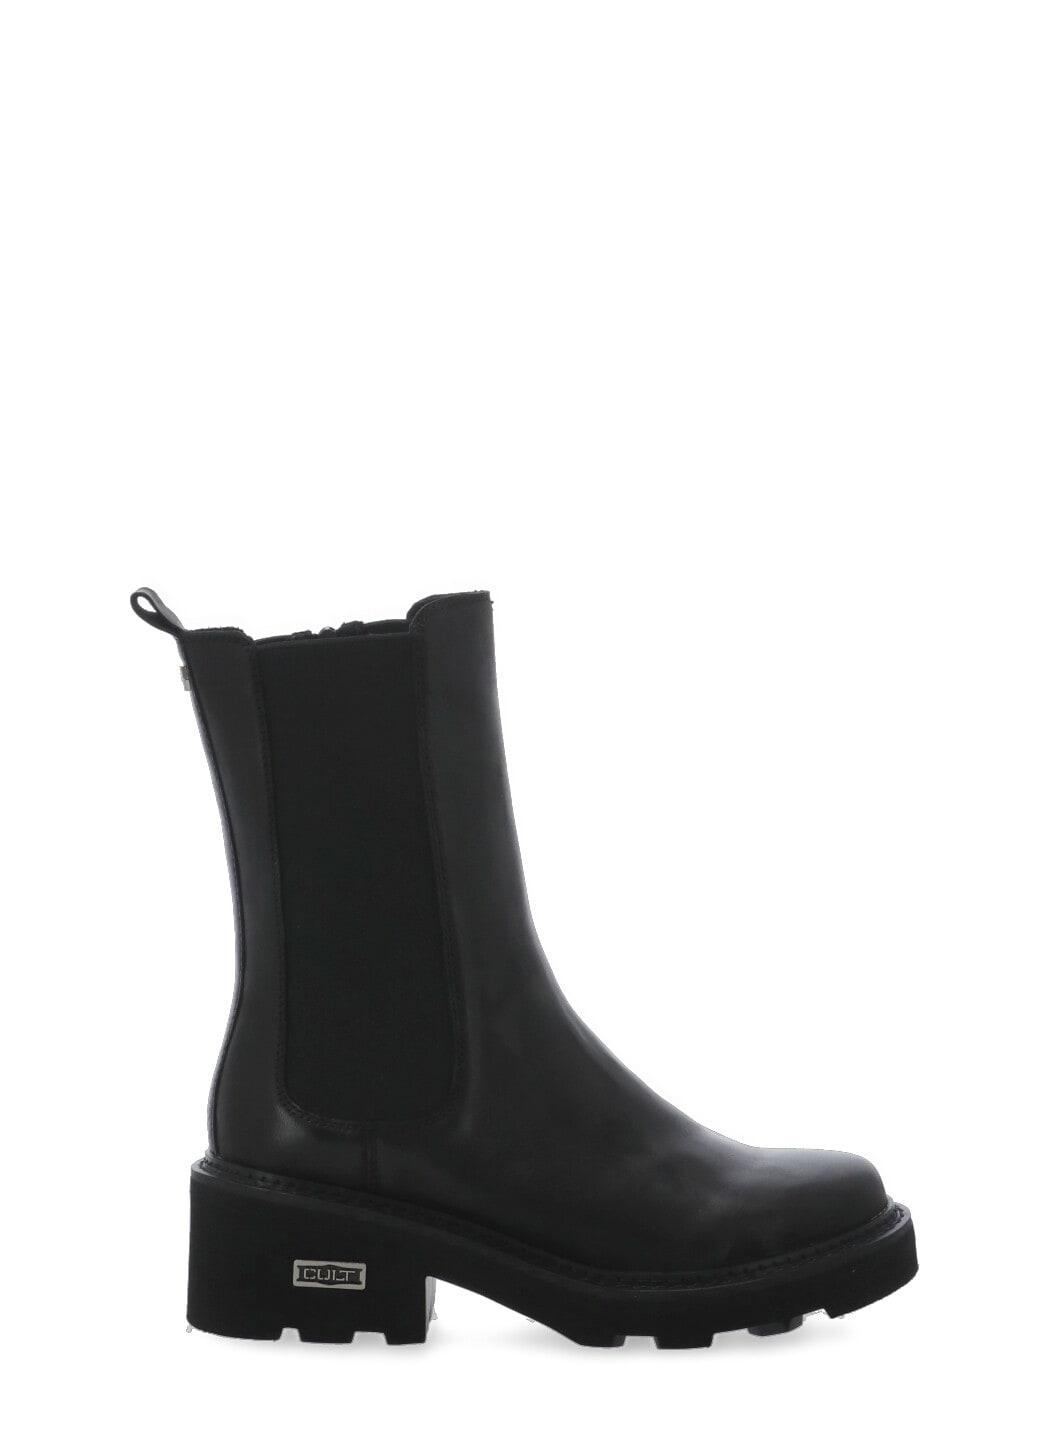 Cult Grace 3545 Boots in Black | Lyst